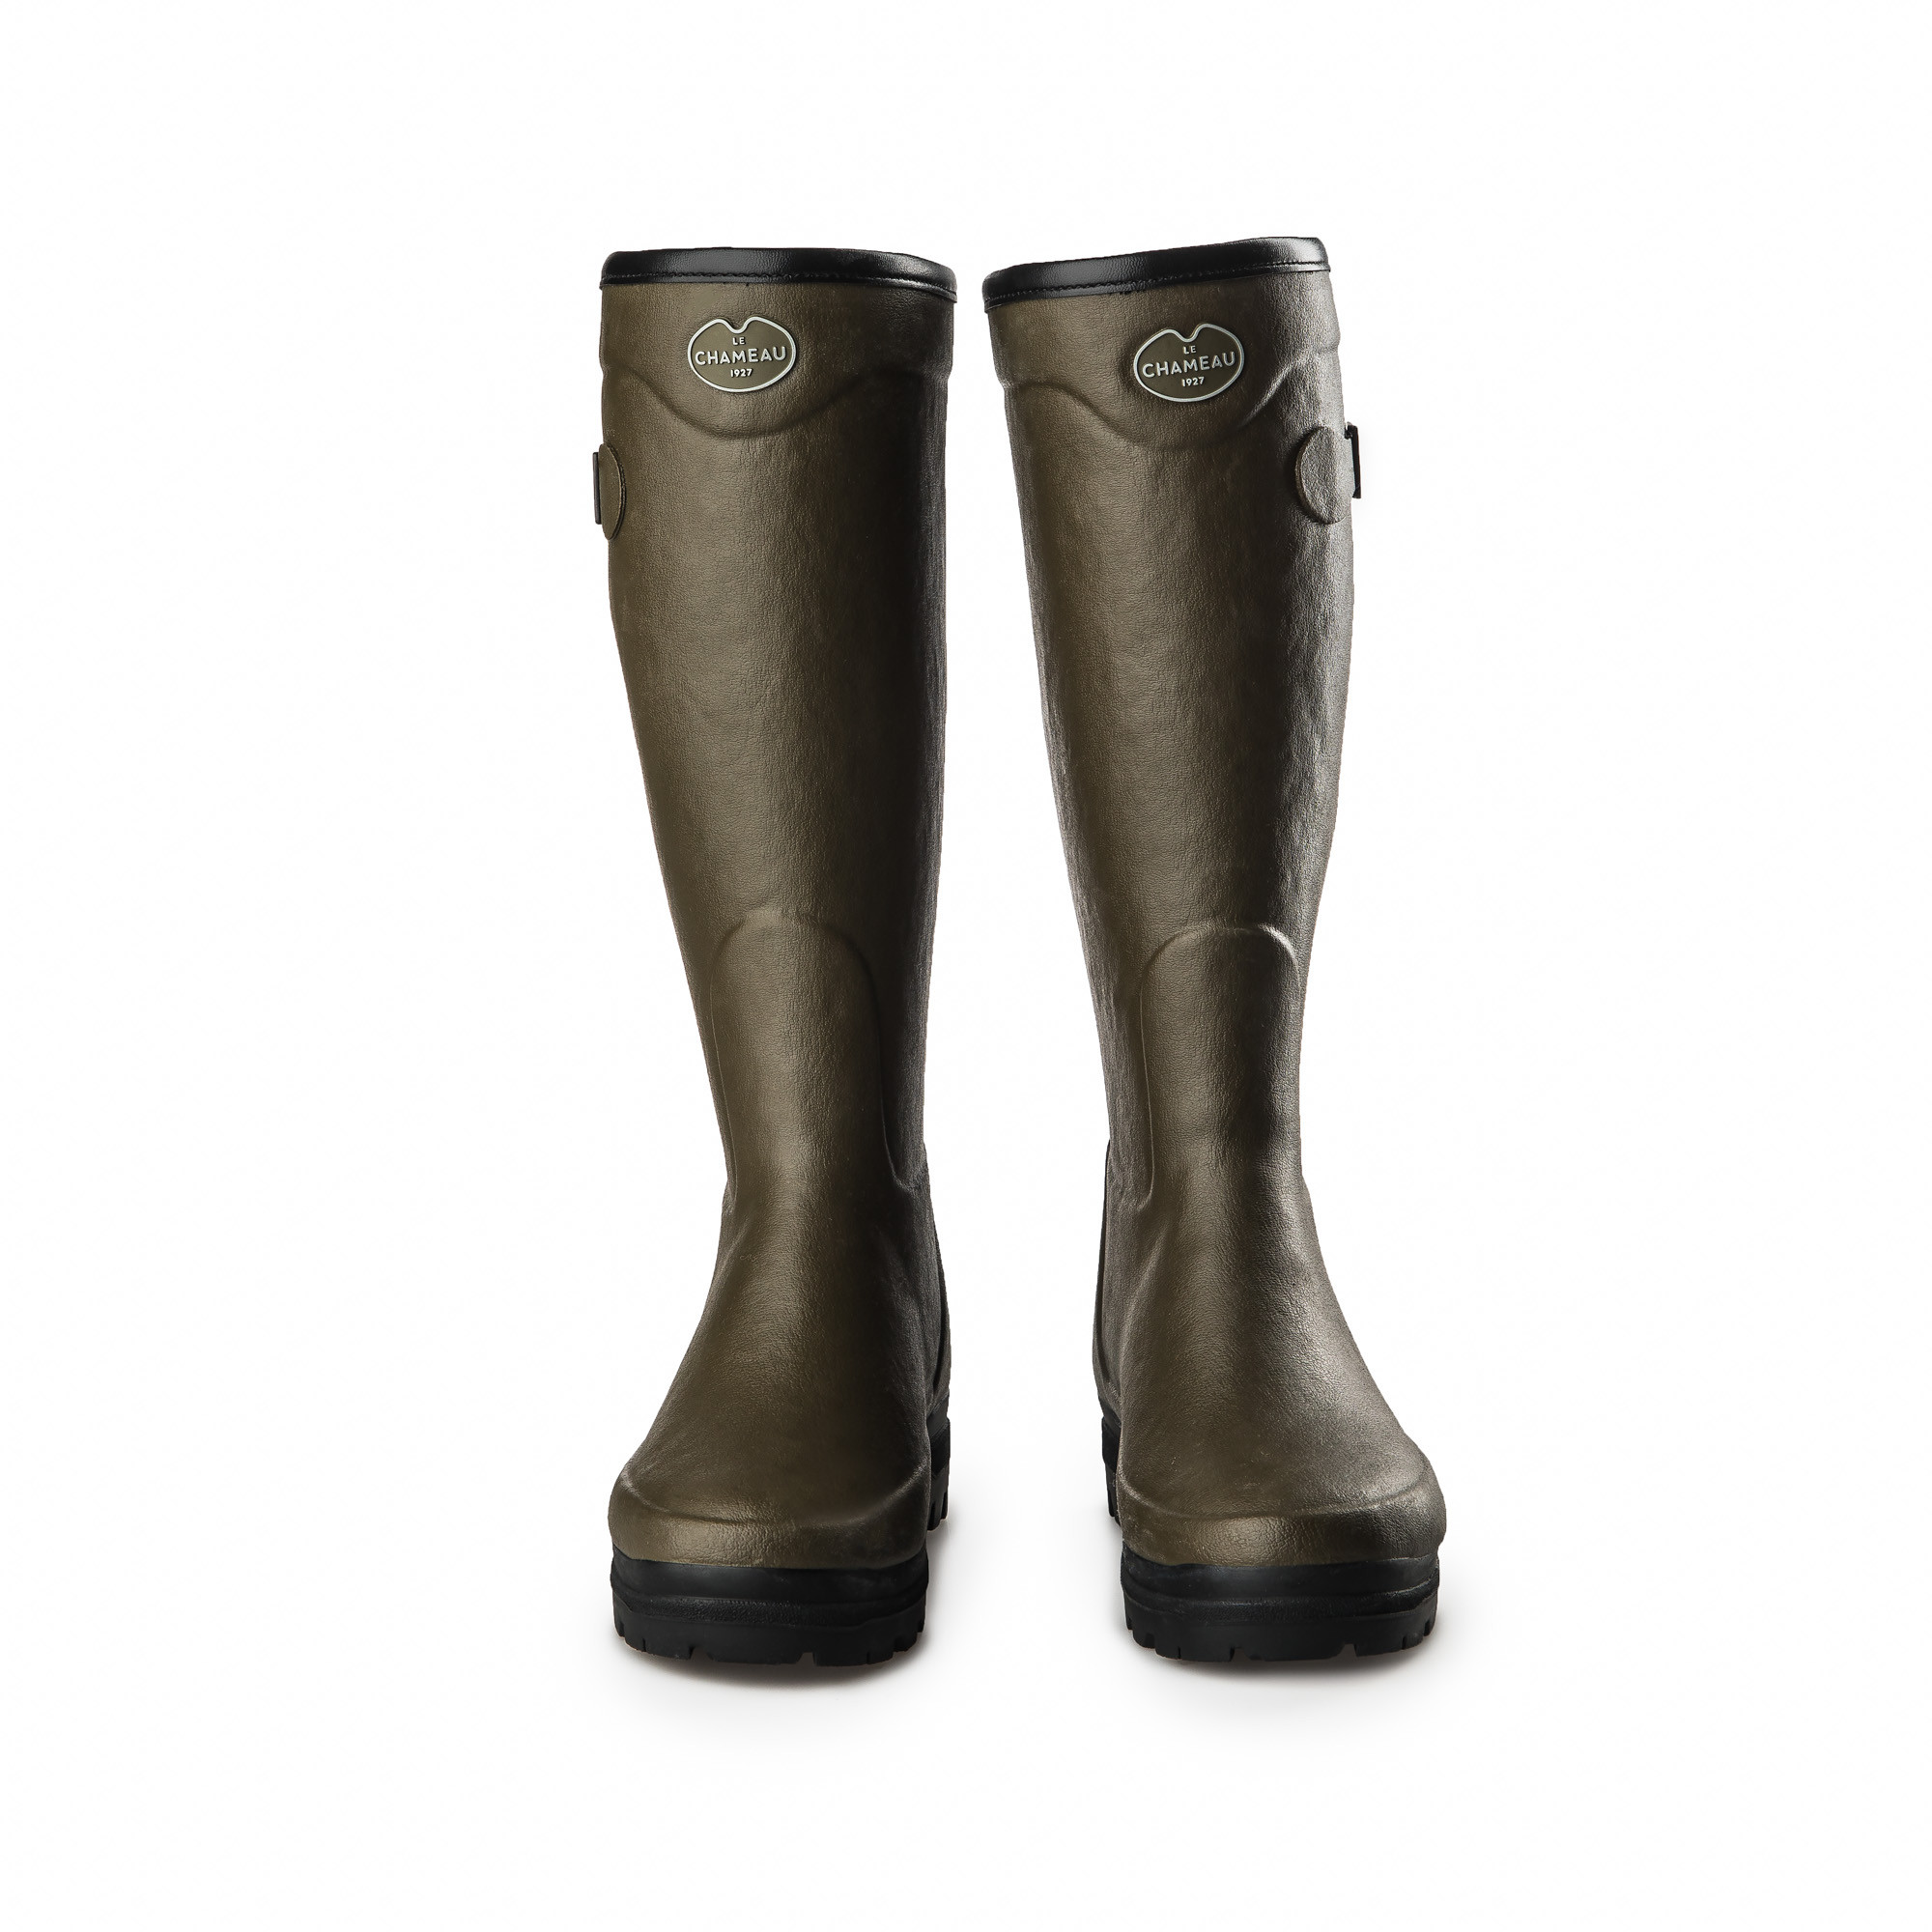 Green Le Chameau Country Lady Fourree Fur Lined Wellington Boots